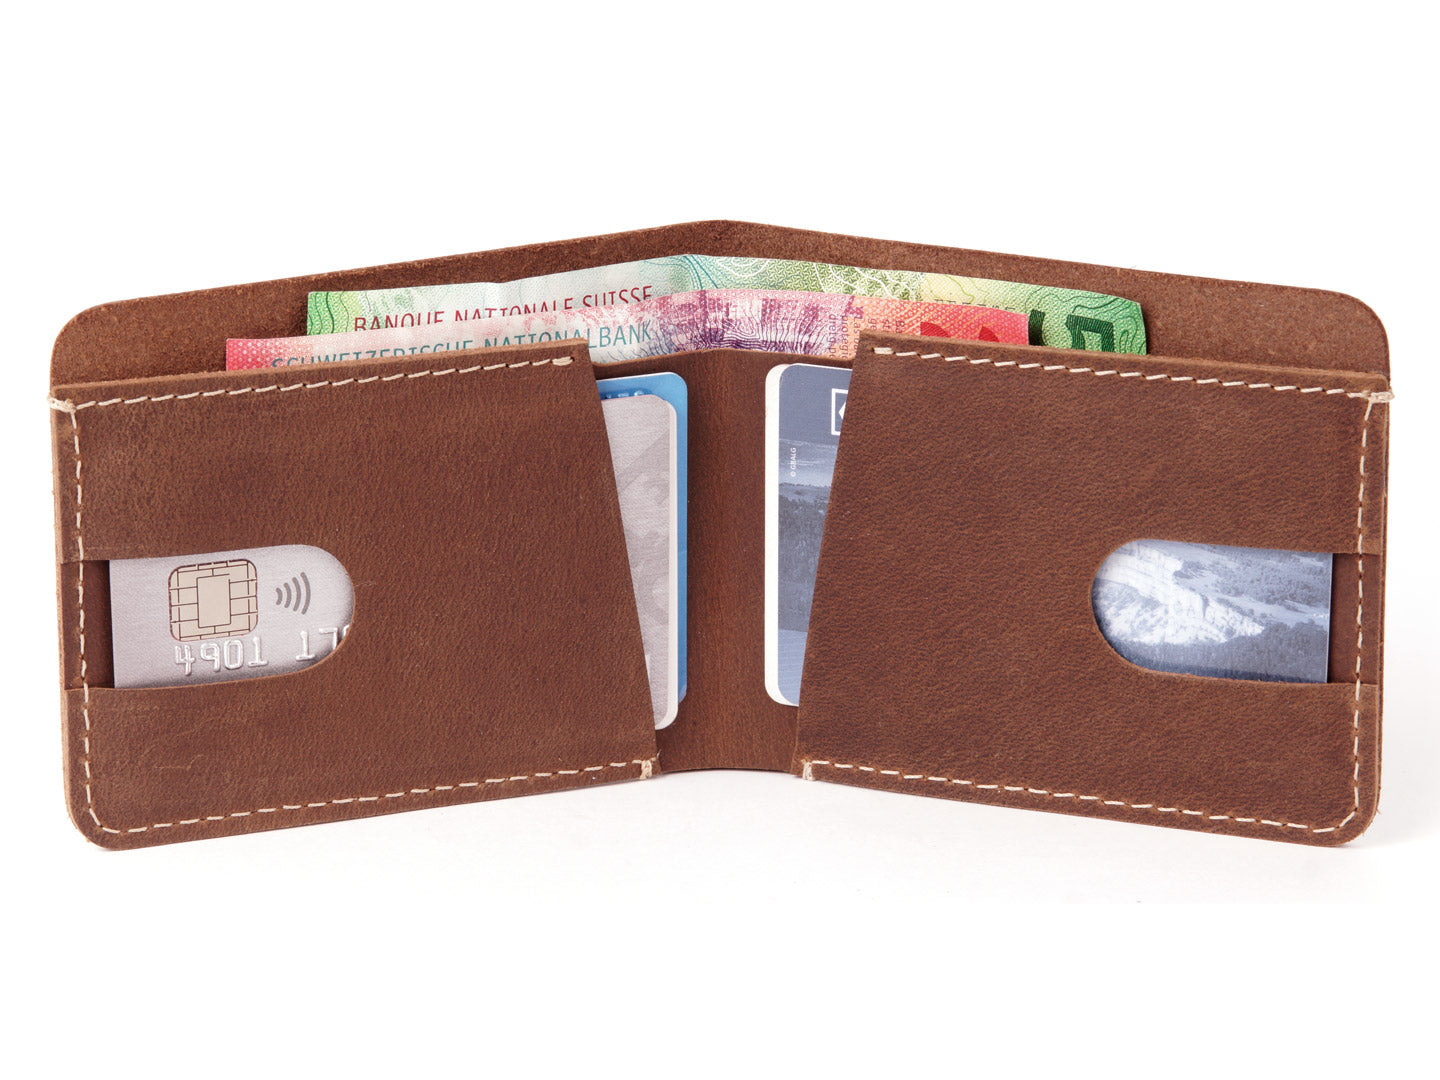 Leather Minimalist Wallets for Women and Men Are Small Slim 